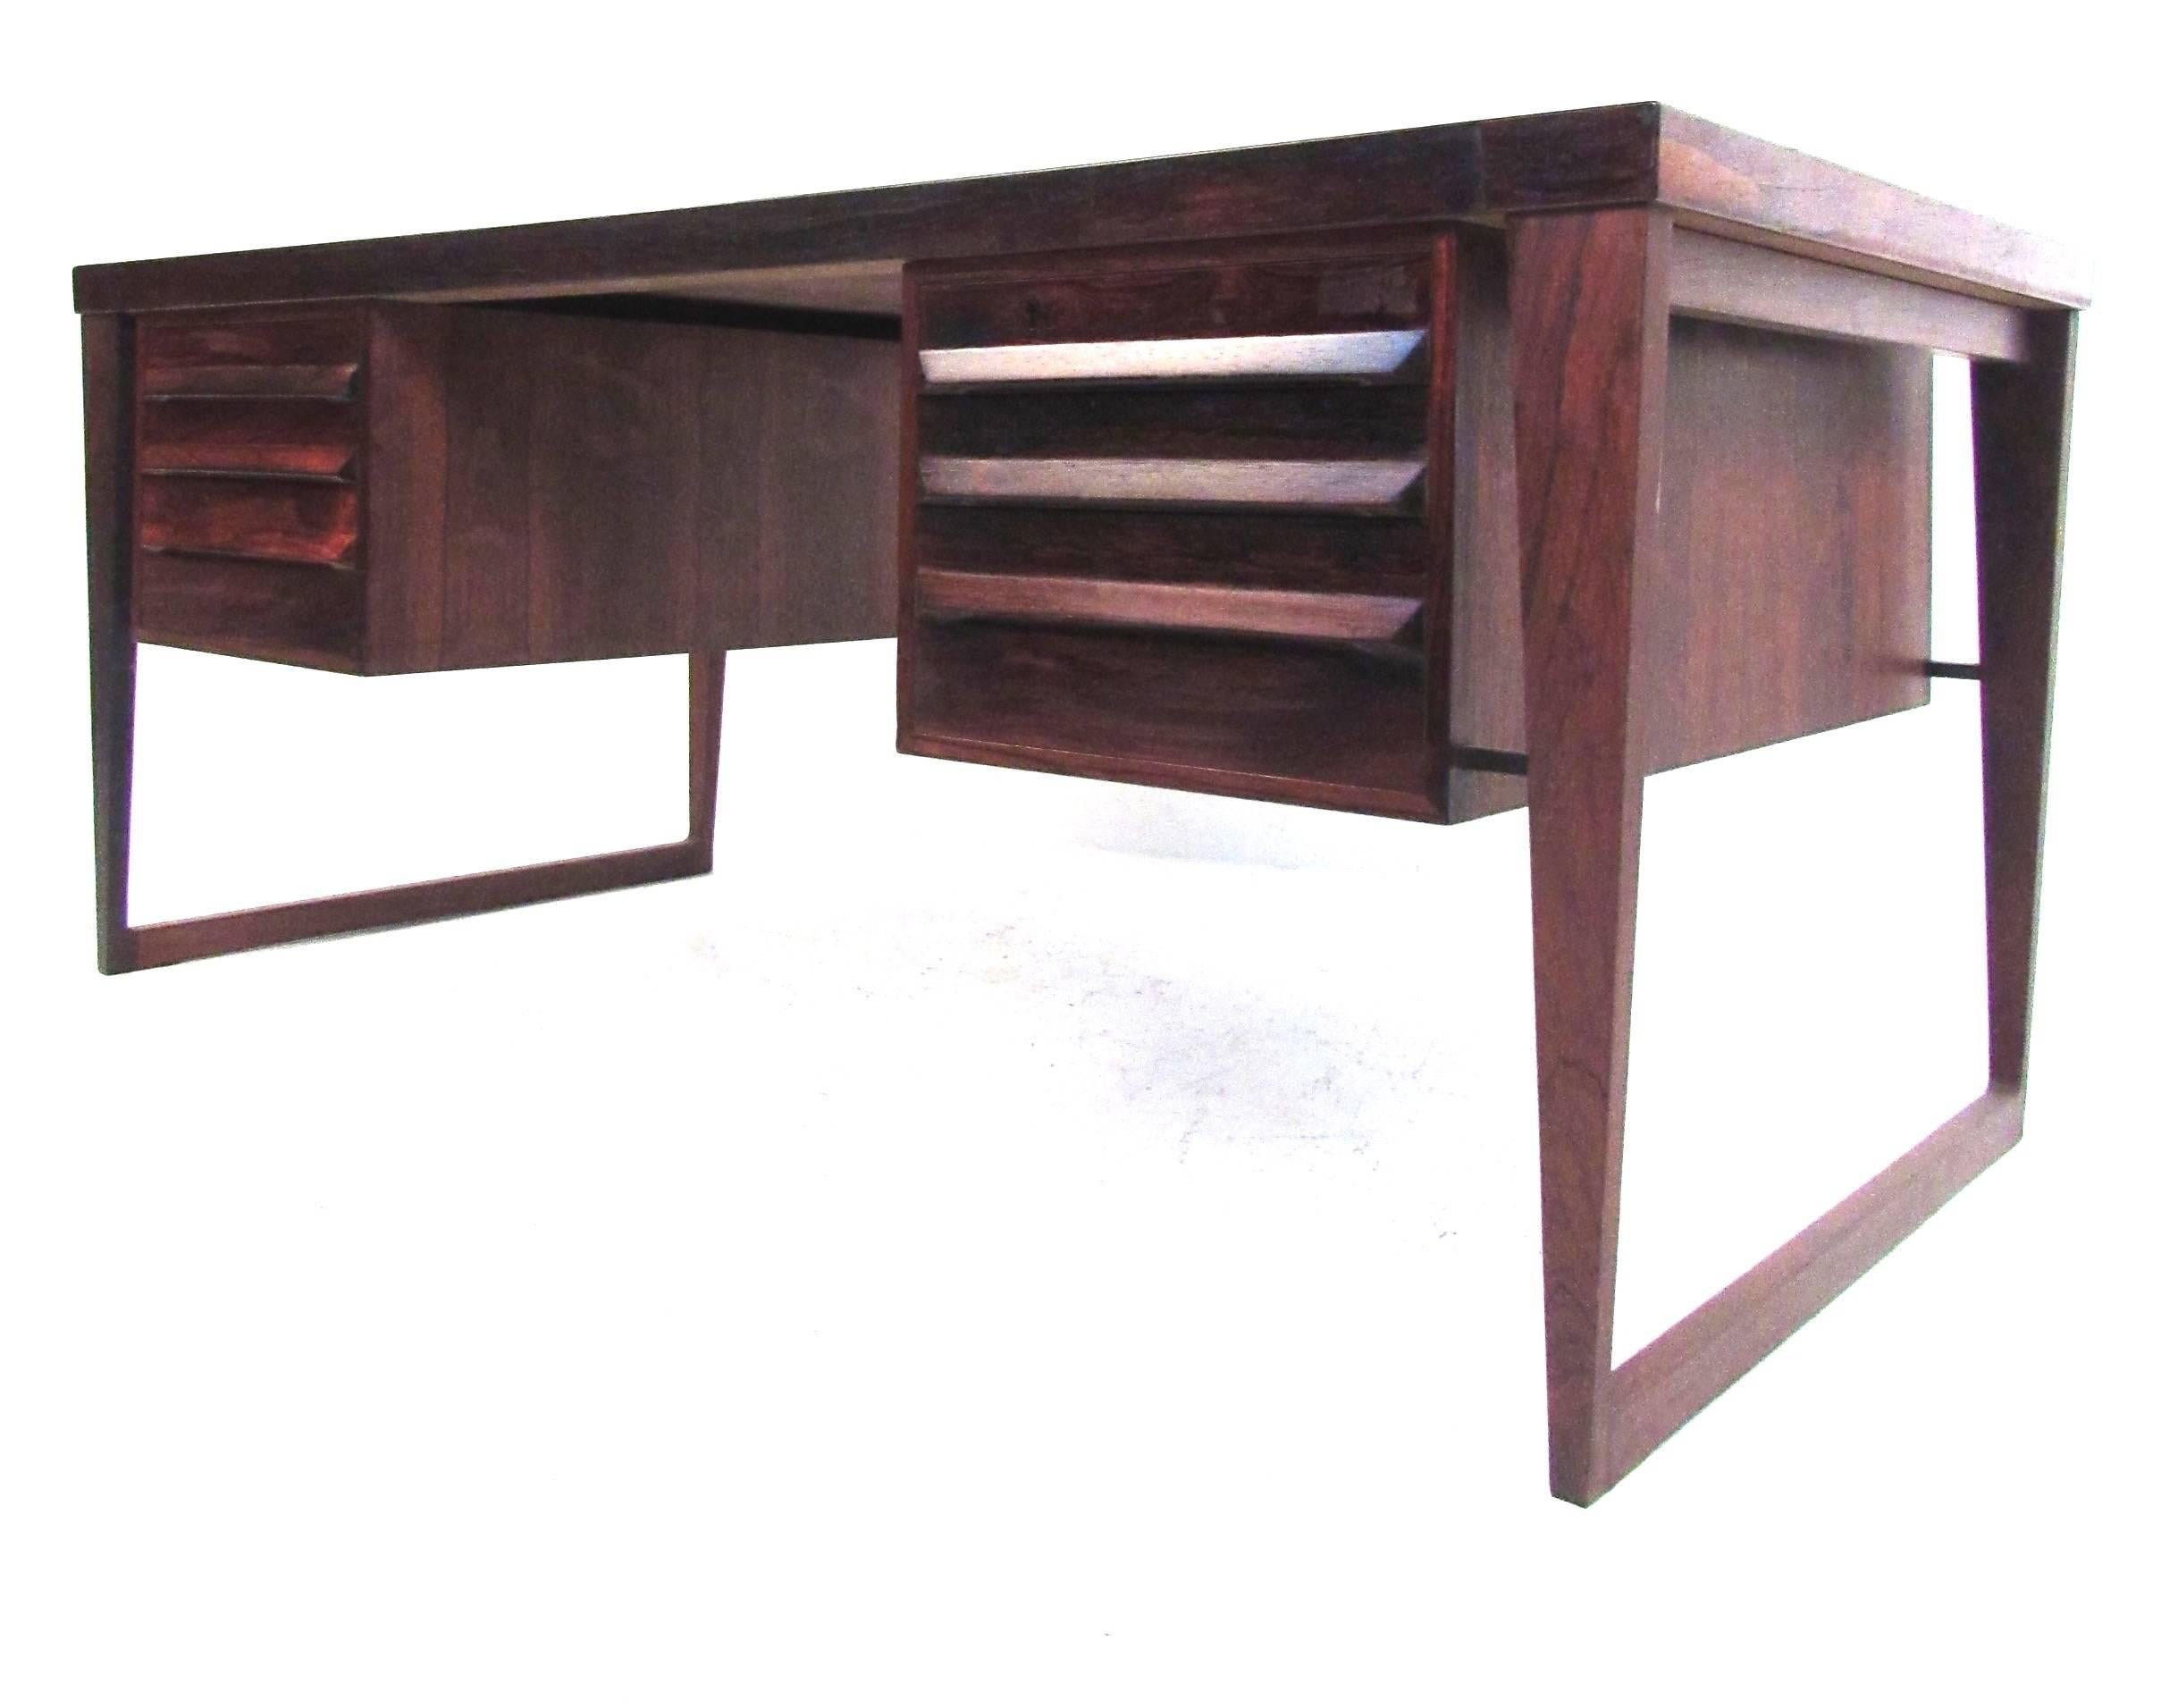 This stunning vintage rosewood desk features the masterful Mid-Century design of Kai Kristiansen. Unique sculpted drawer pulls, tapered floating sled legs, and dovetailed joints showcase the impeccable attention to detail taken in the construction